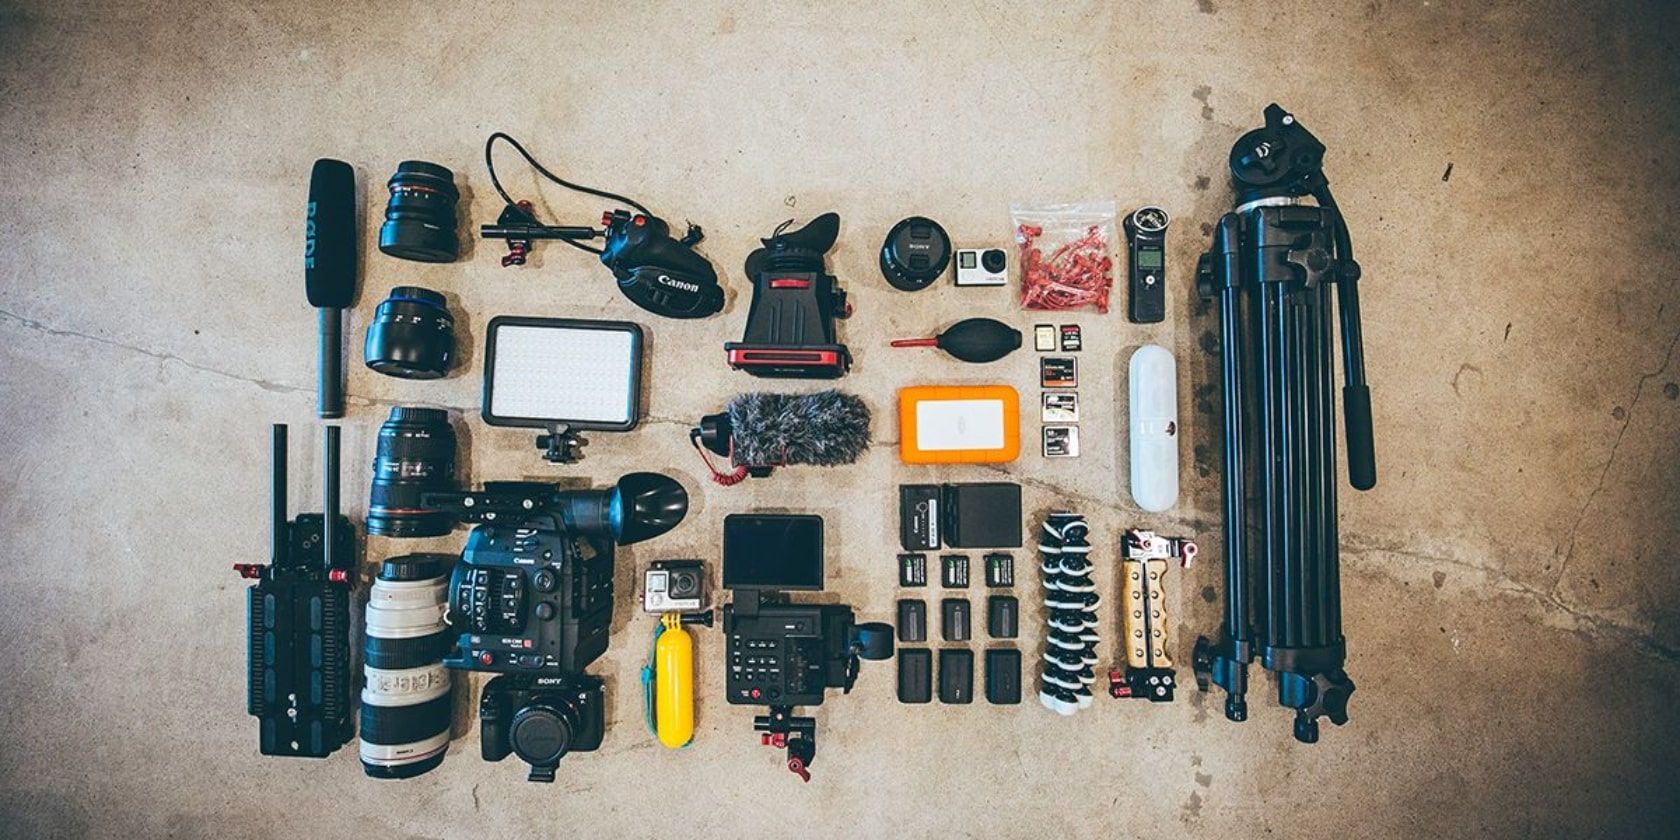 How to Buy, Sell, and Trade Used Photography Gear on MPB